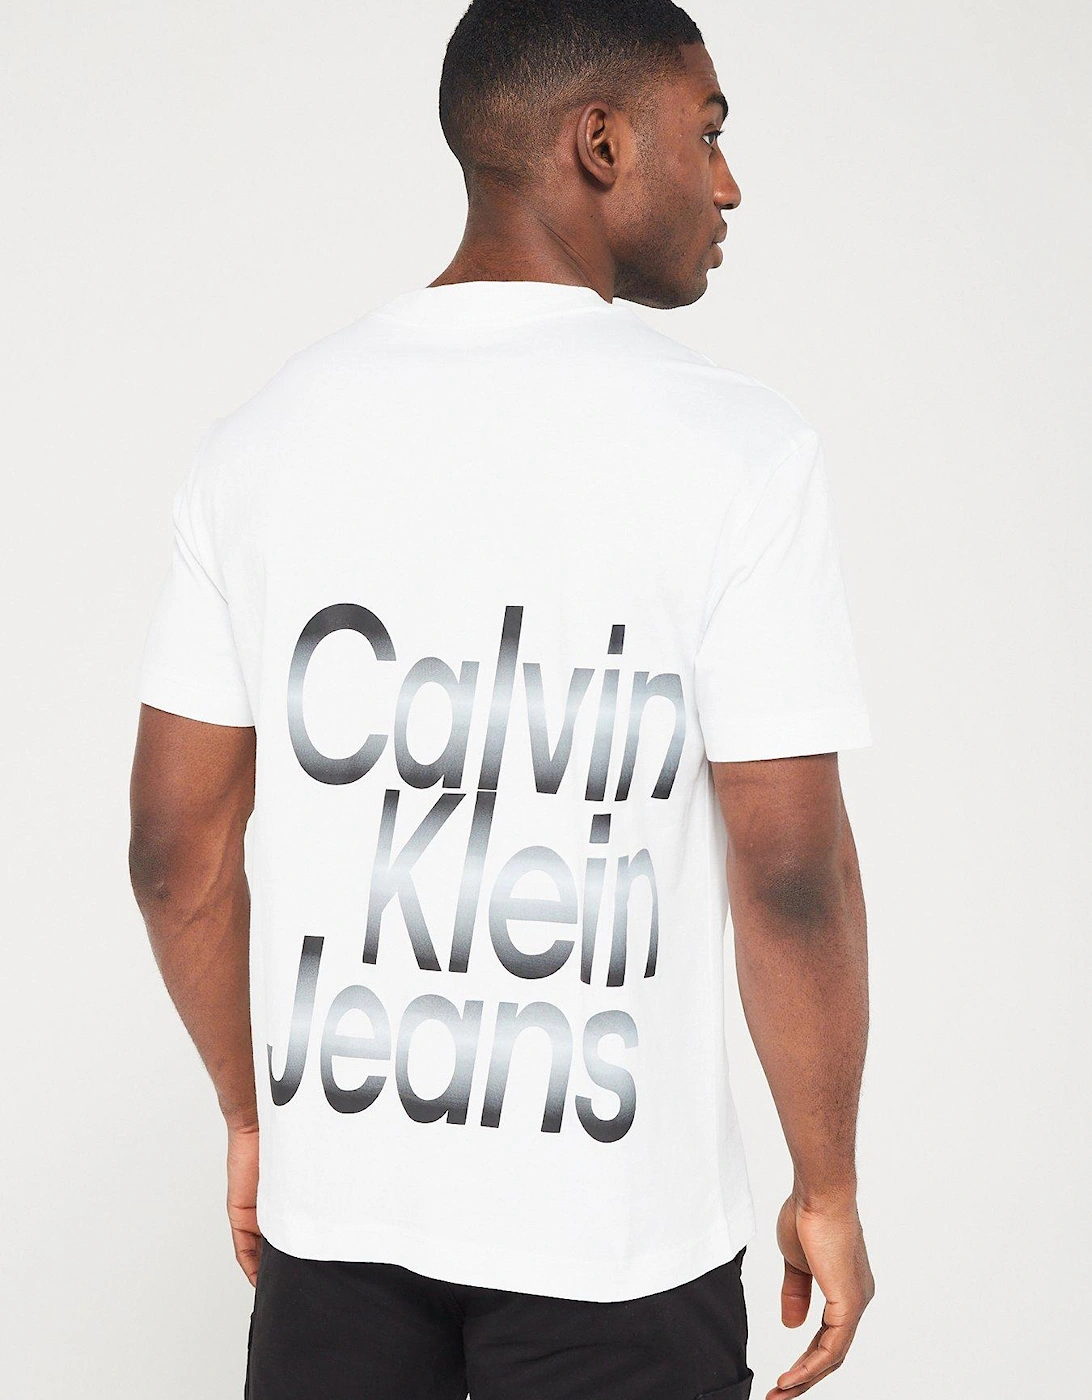 Blown Up Diffused Stacked T-Shirt - White